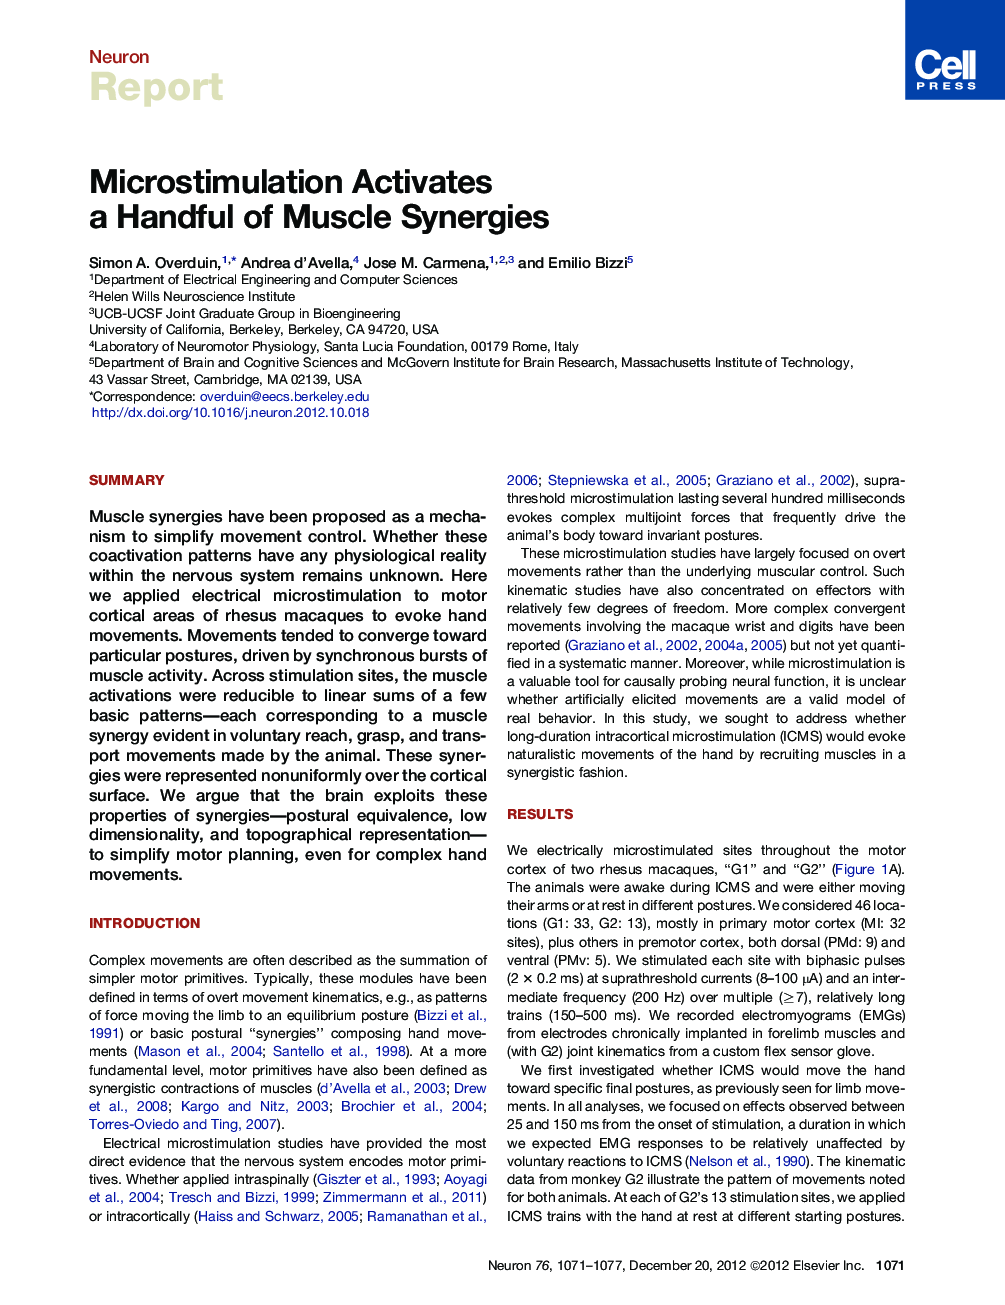 Microstimulation Activates a Handful of Muscle Synergies